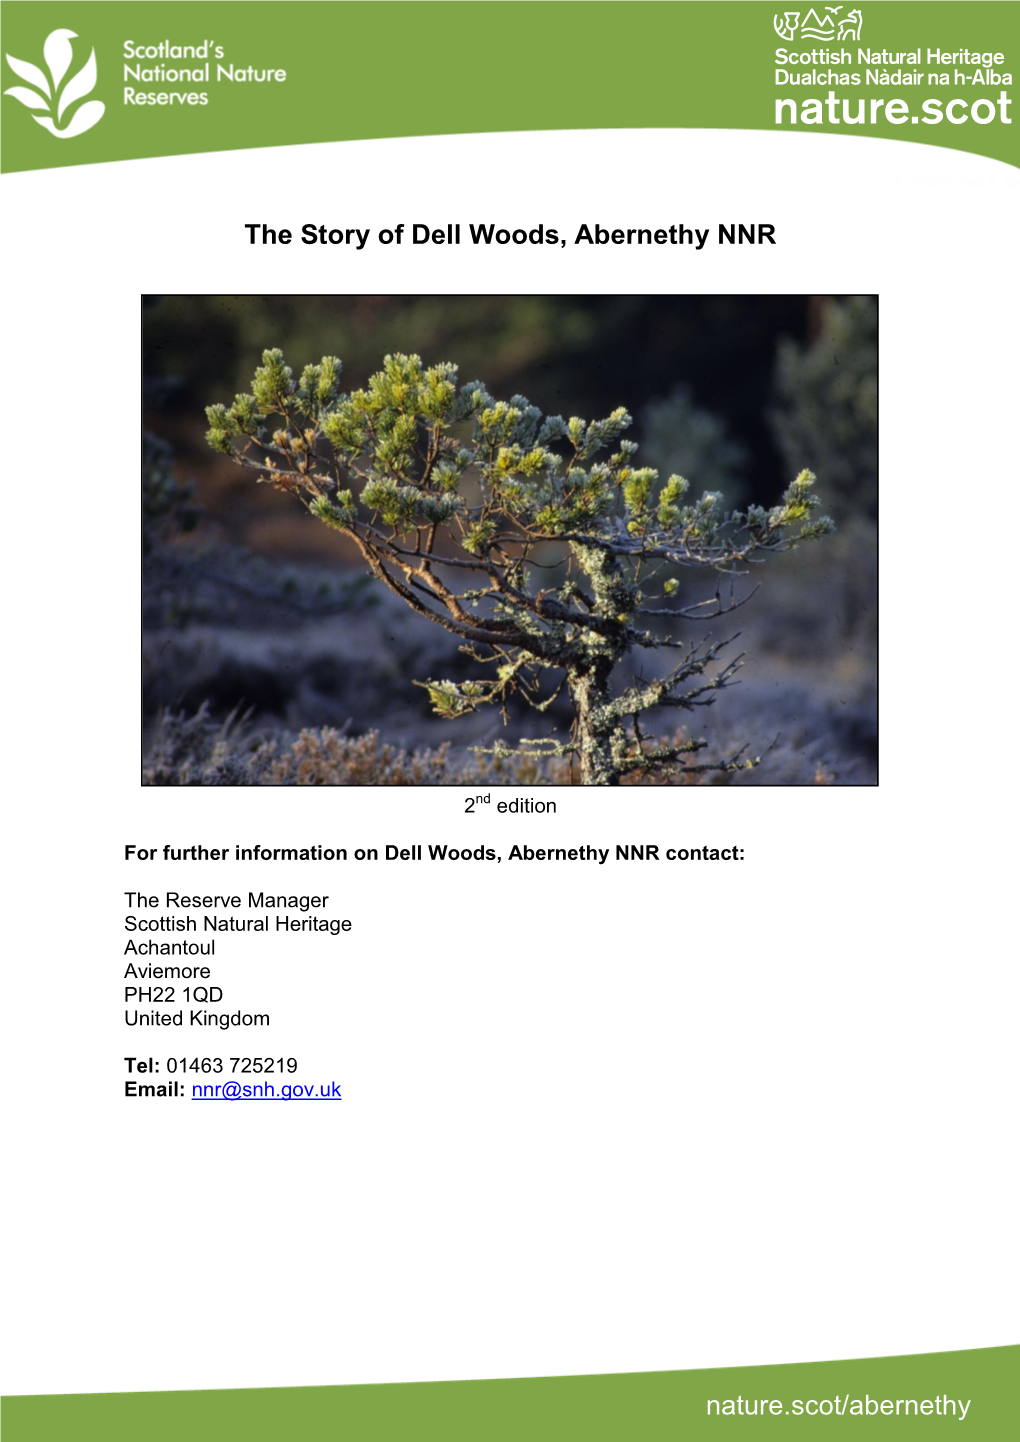 The Story of Dell Woods, Abernethy NNR